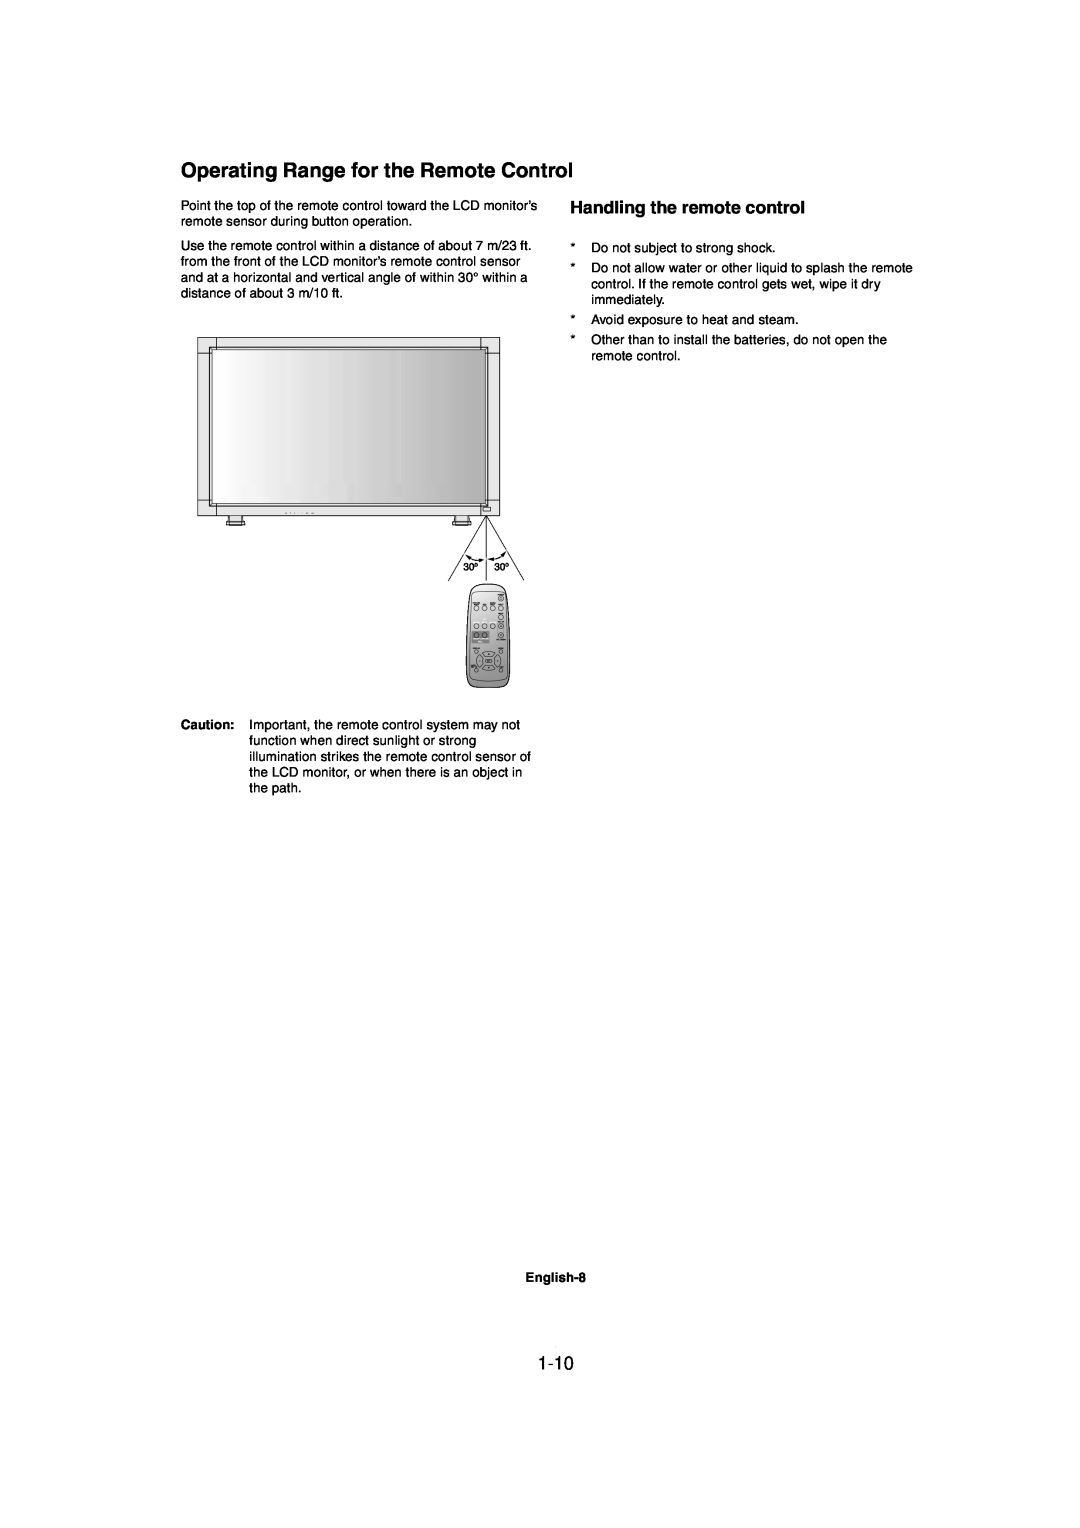 Mitsubishi Electronics MDT321S user manual Operating Range for the Remote Control, Handling the remote control, 1-10 